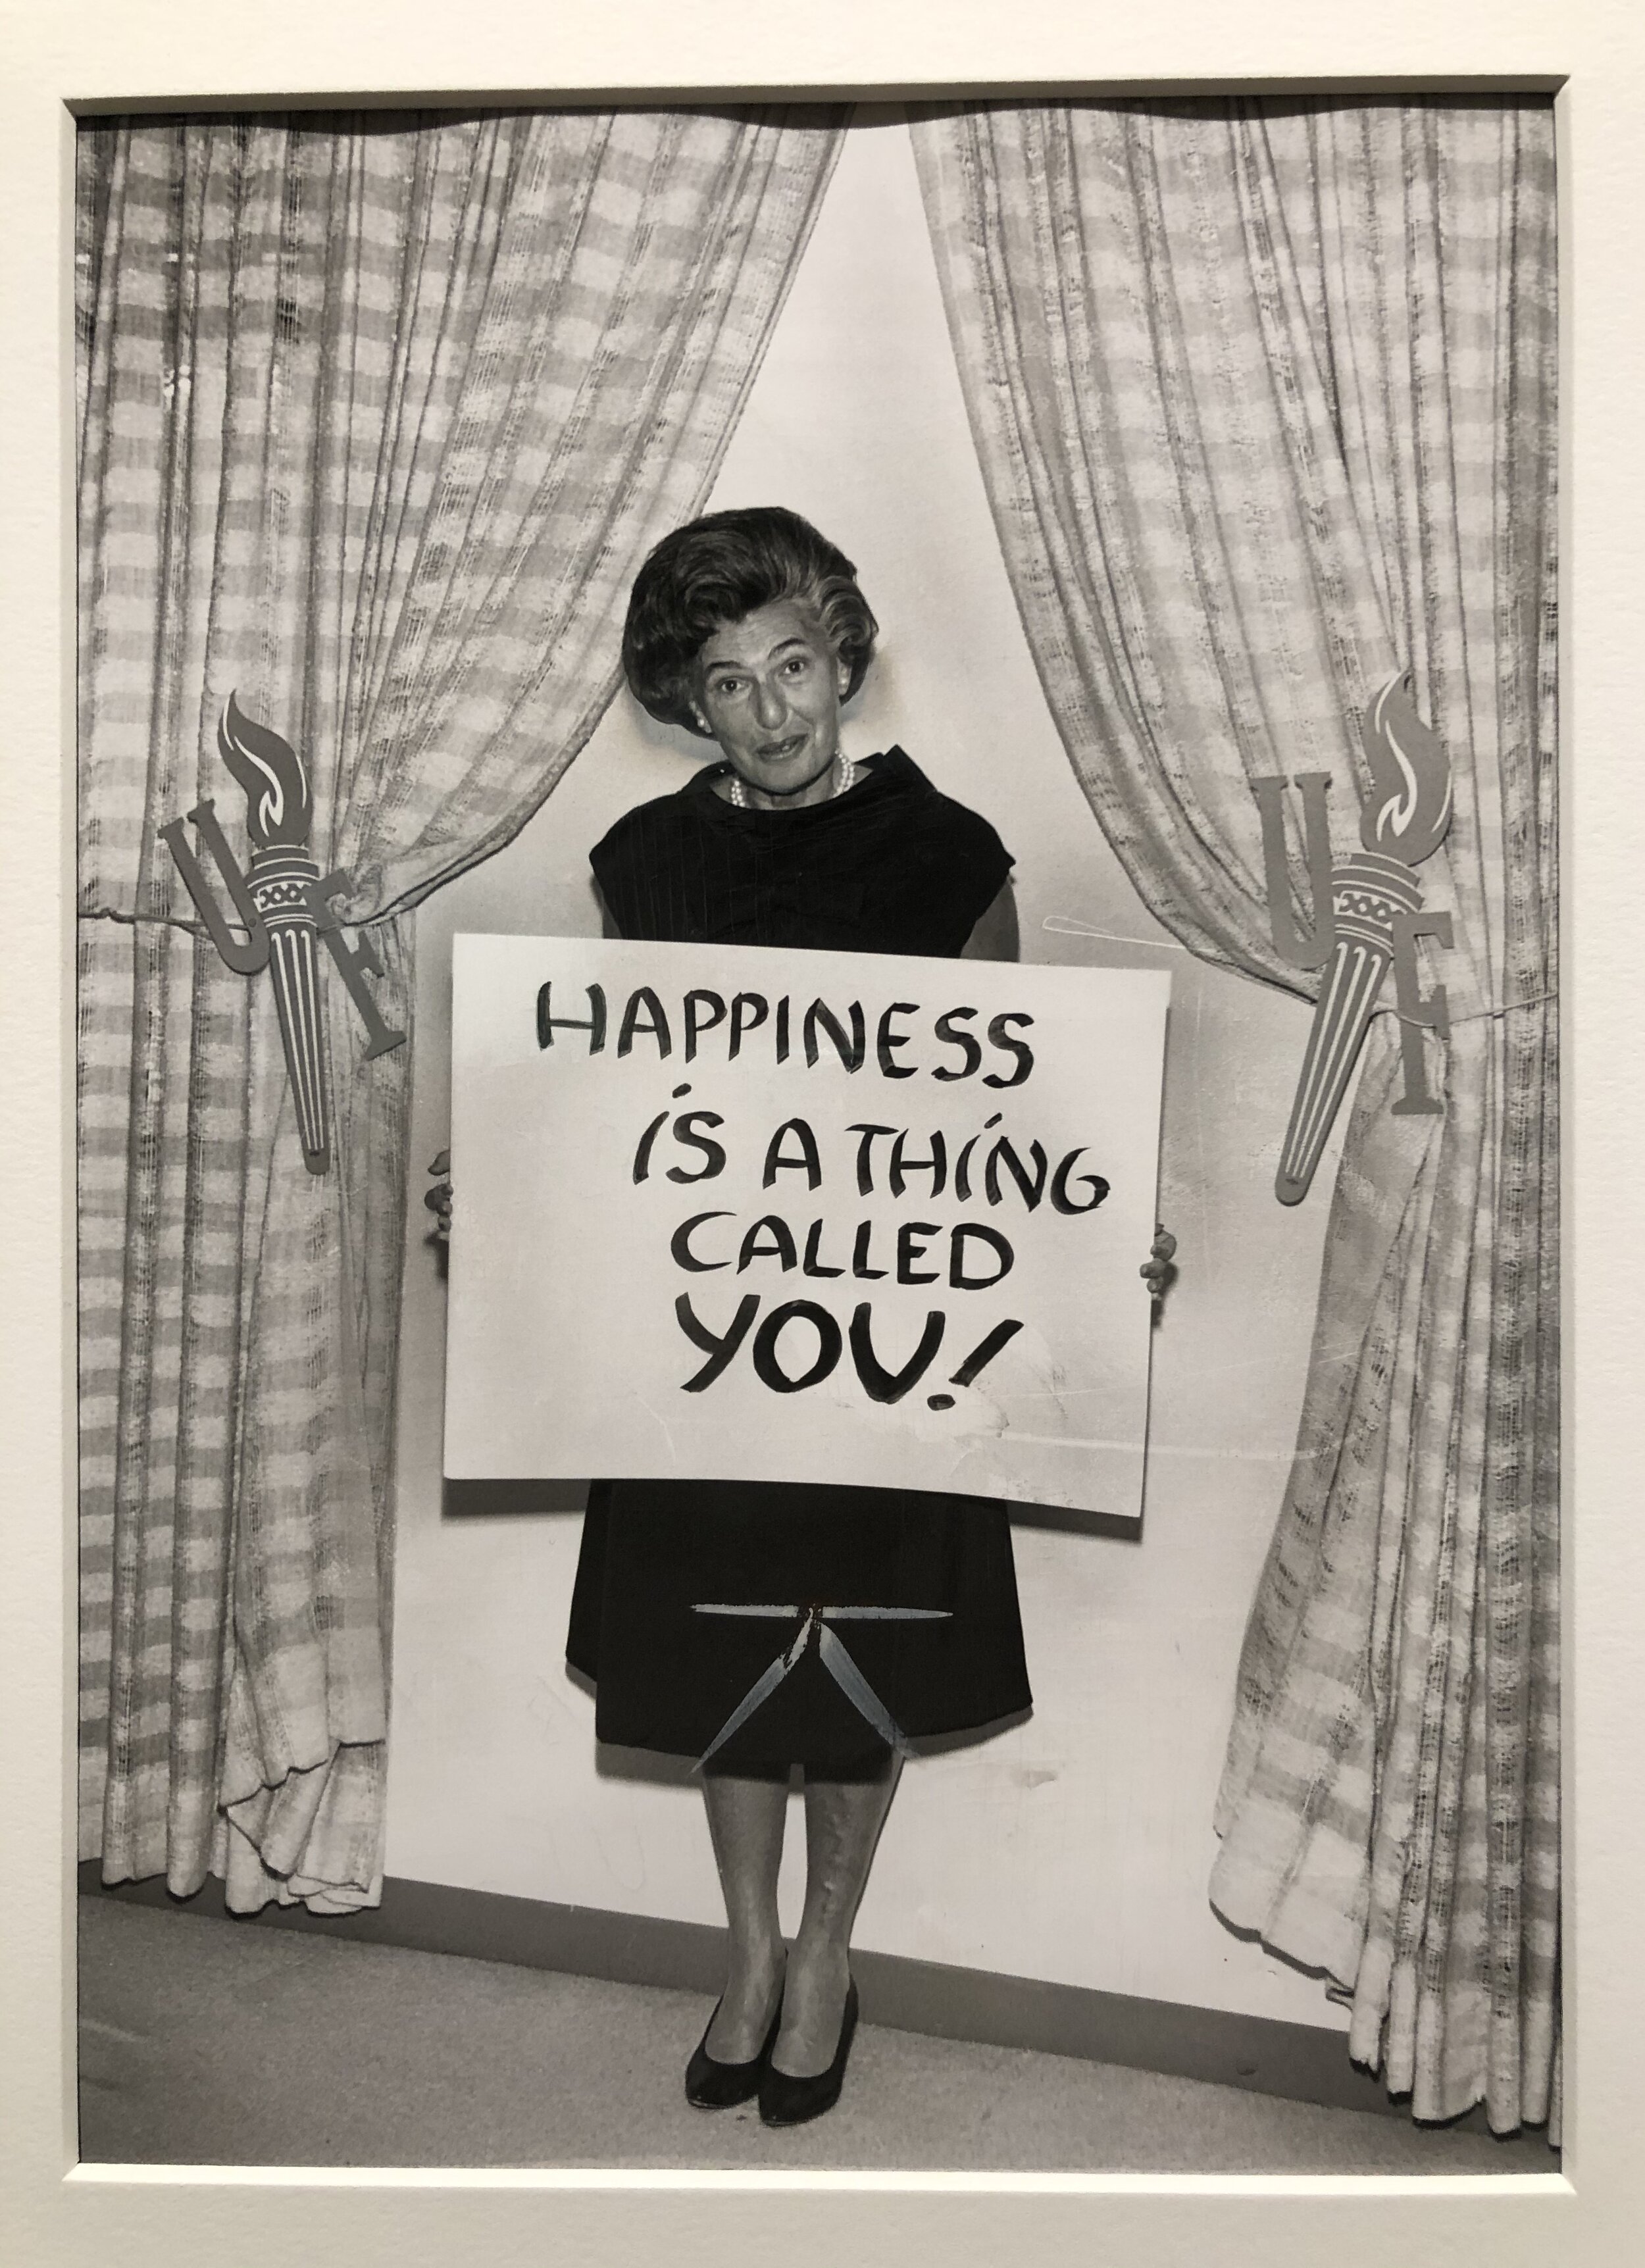 PHOTOGRAPHER UNKNOWN - Untitled (Happiness Is A Thing Called You!) 1965 - Gelatin Silver Print.